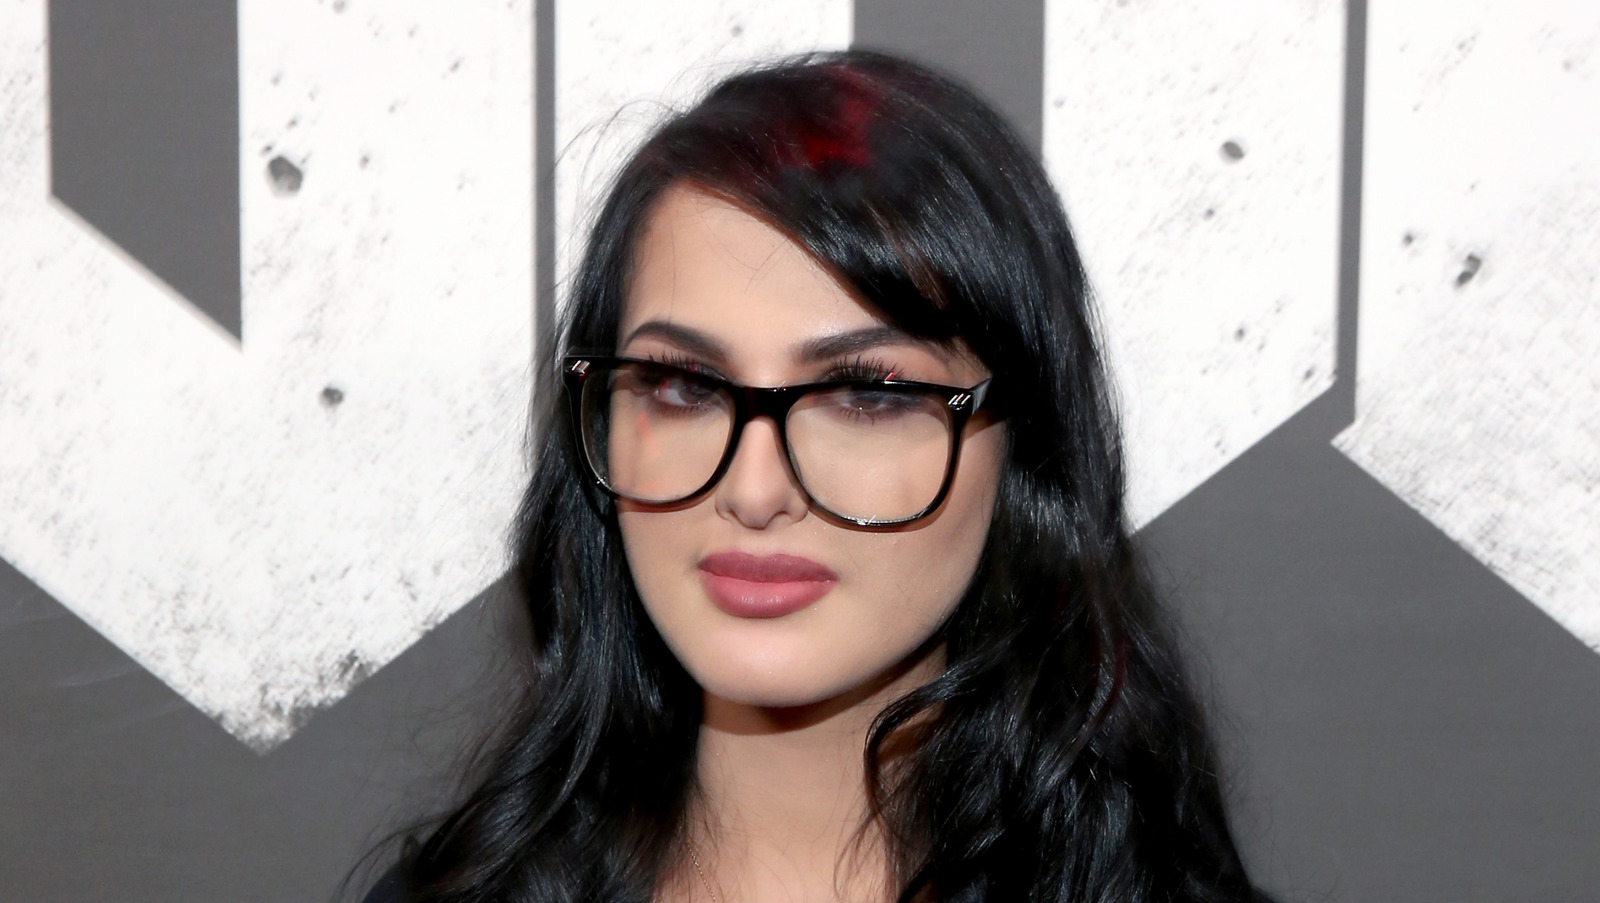 The 30-year old son of father (?) and mother(?) Sssniperwolf in 2023 photo. Sssniperwolf earned a  million dollar salary - leaving the net worth at  million in 2023